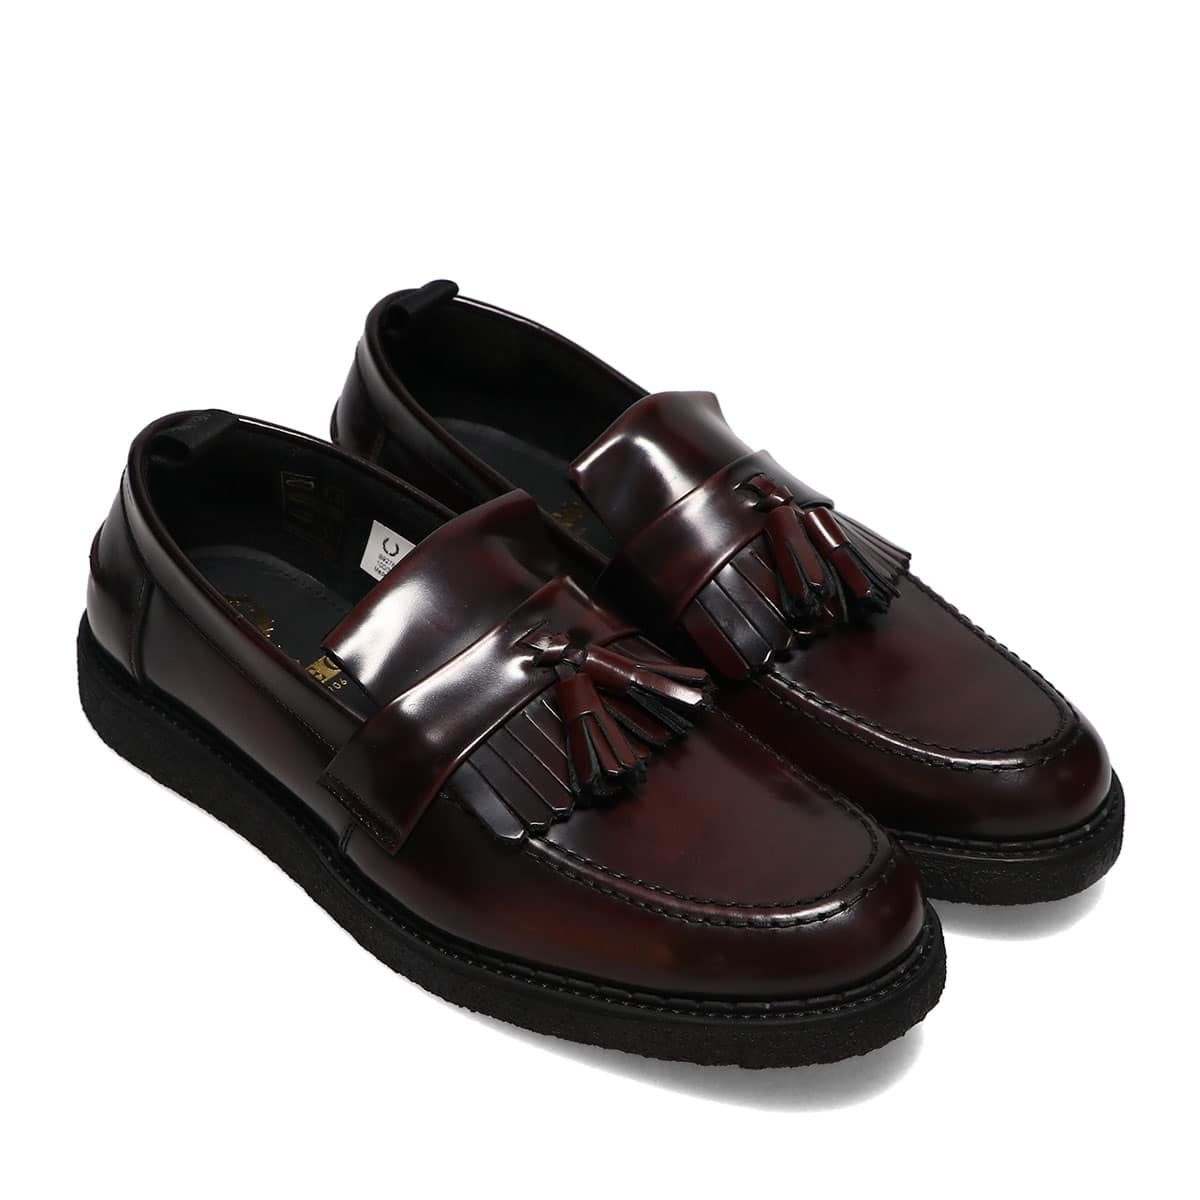 FRED PERRY × GEORGE COX TASSEL LOAFER OX BLOOD 20FA-I